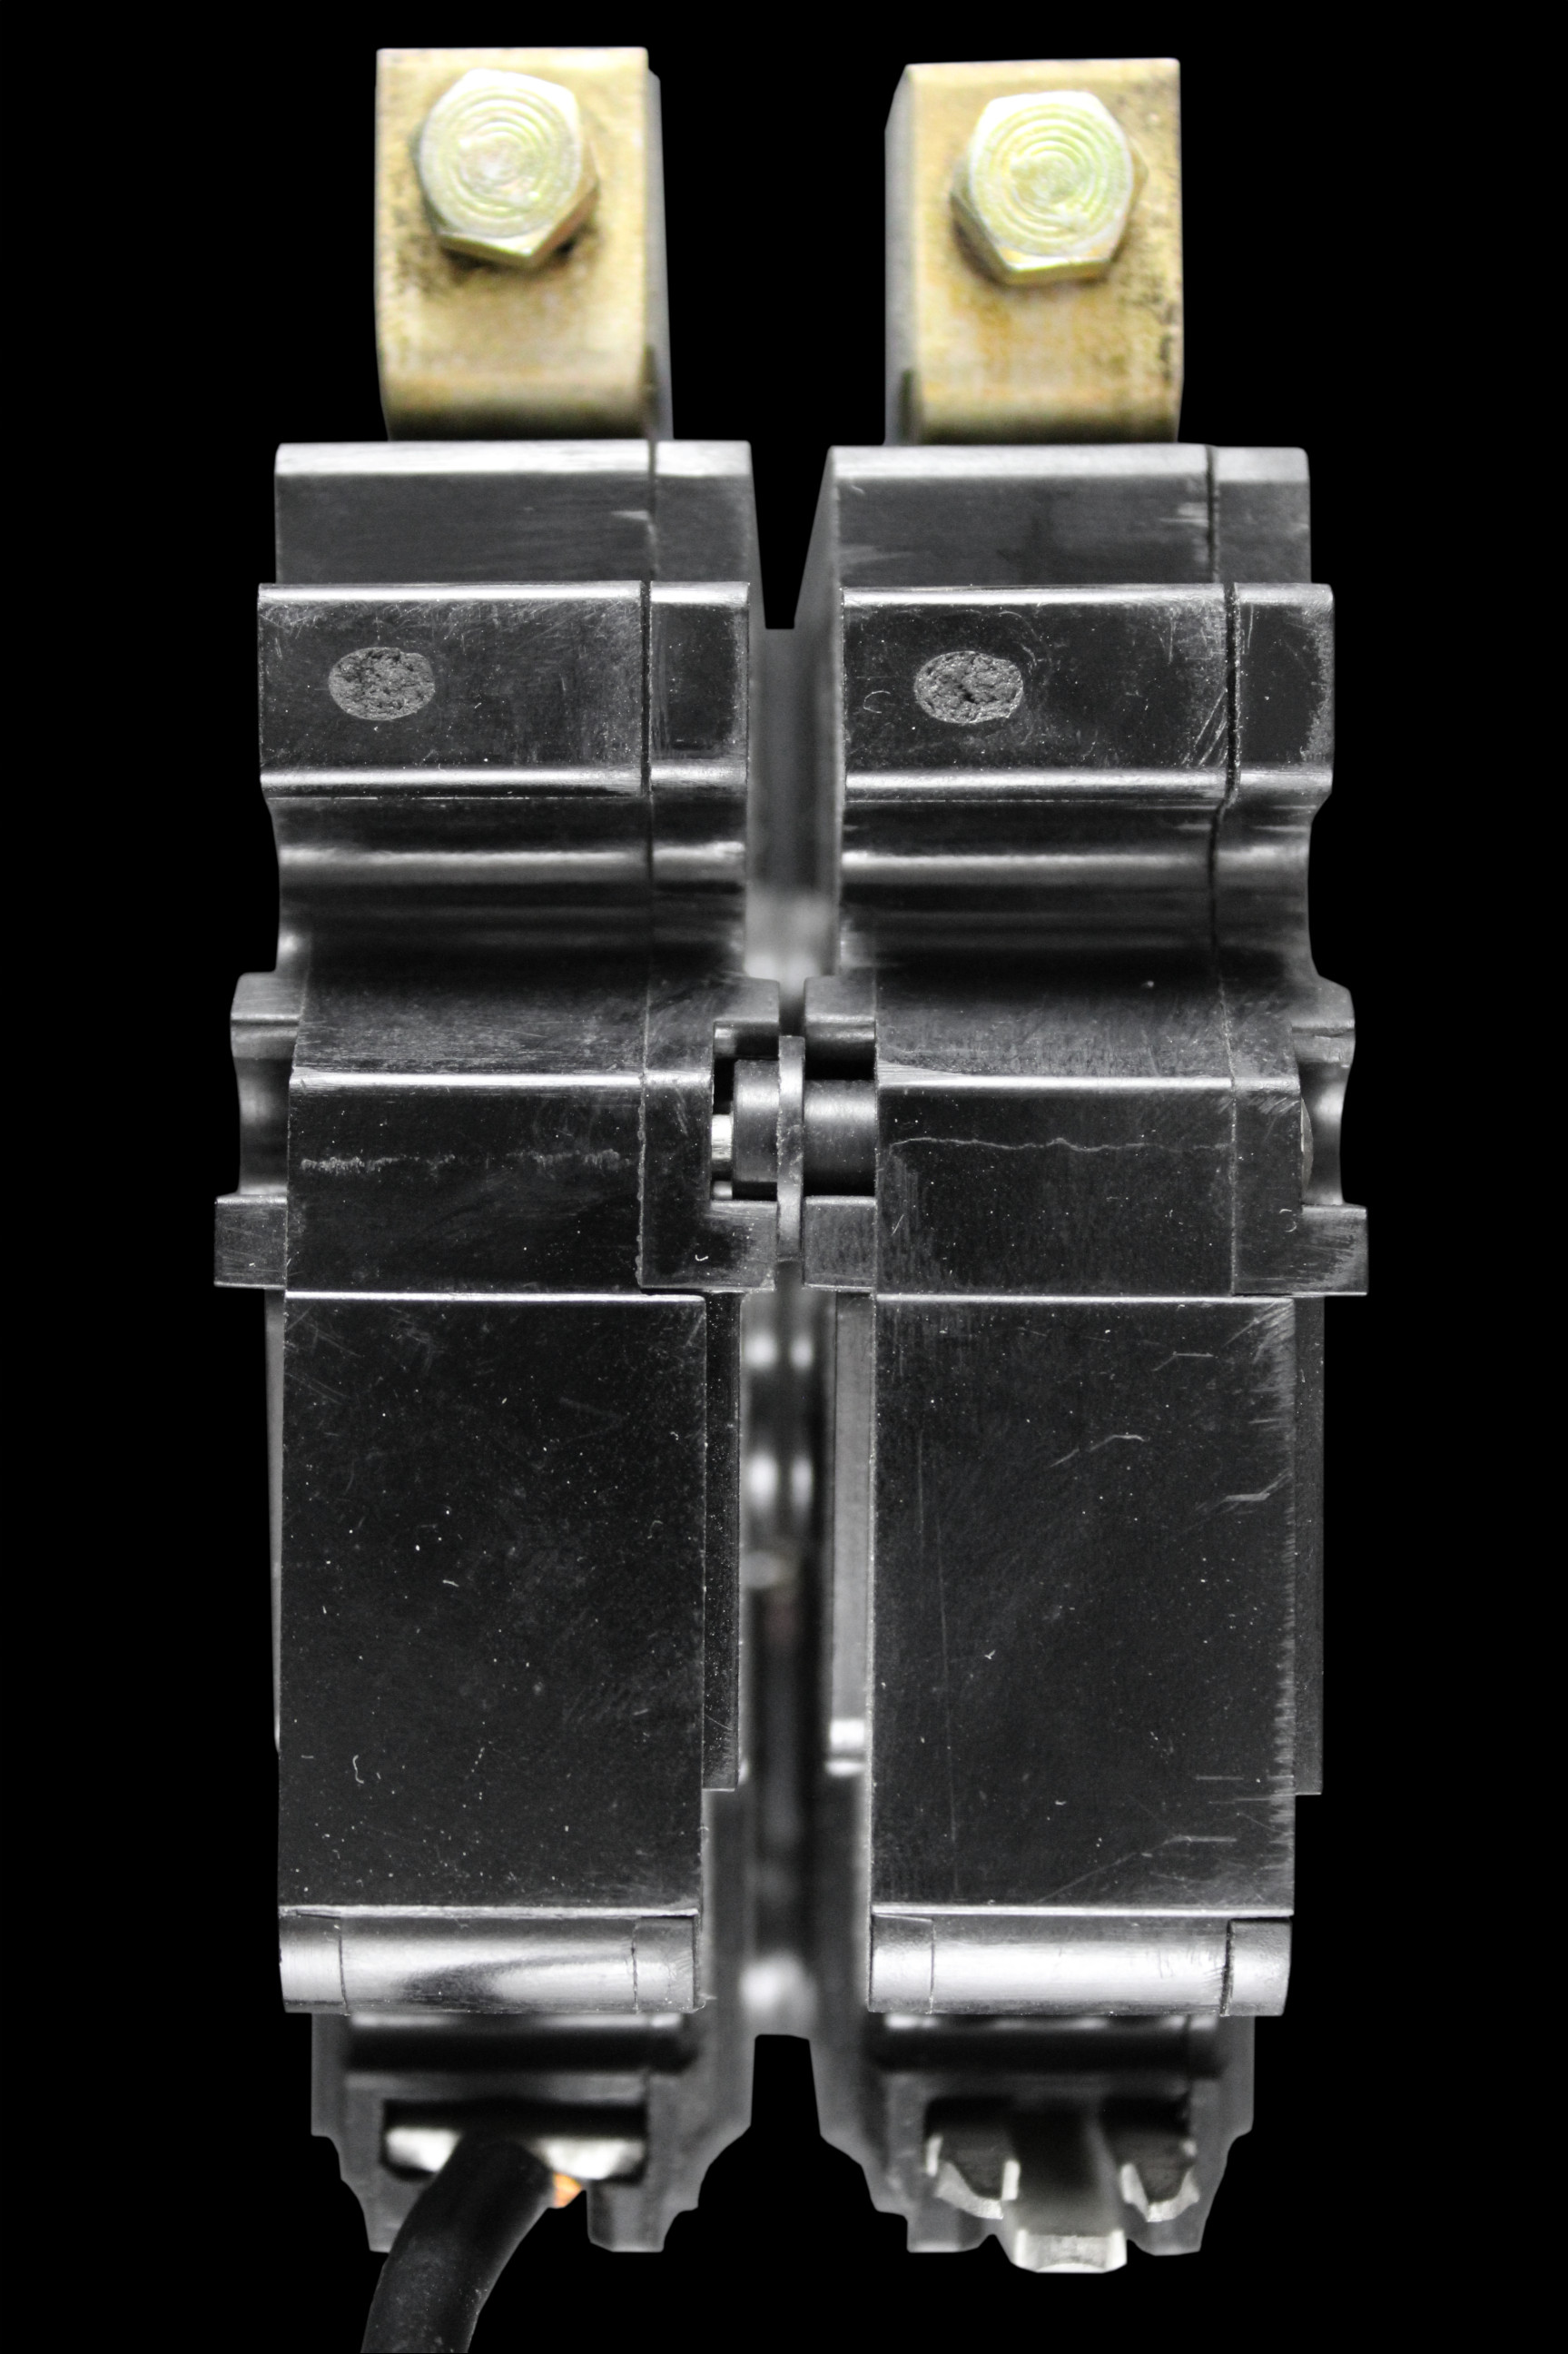 FEDERAL 80 AMP DOUBLE POLE MAIN SWITCH DISCONNECTOR STAB-LOK